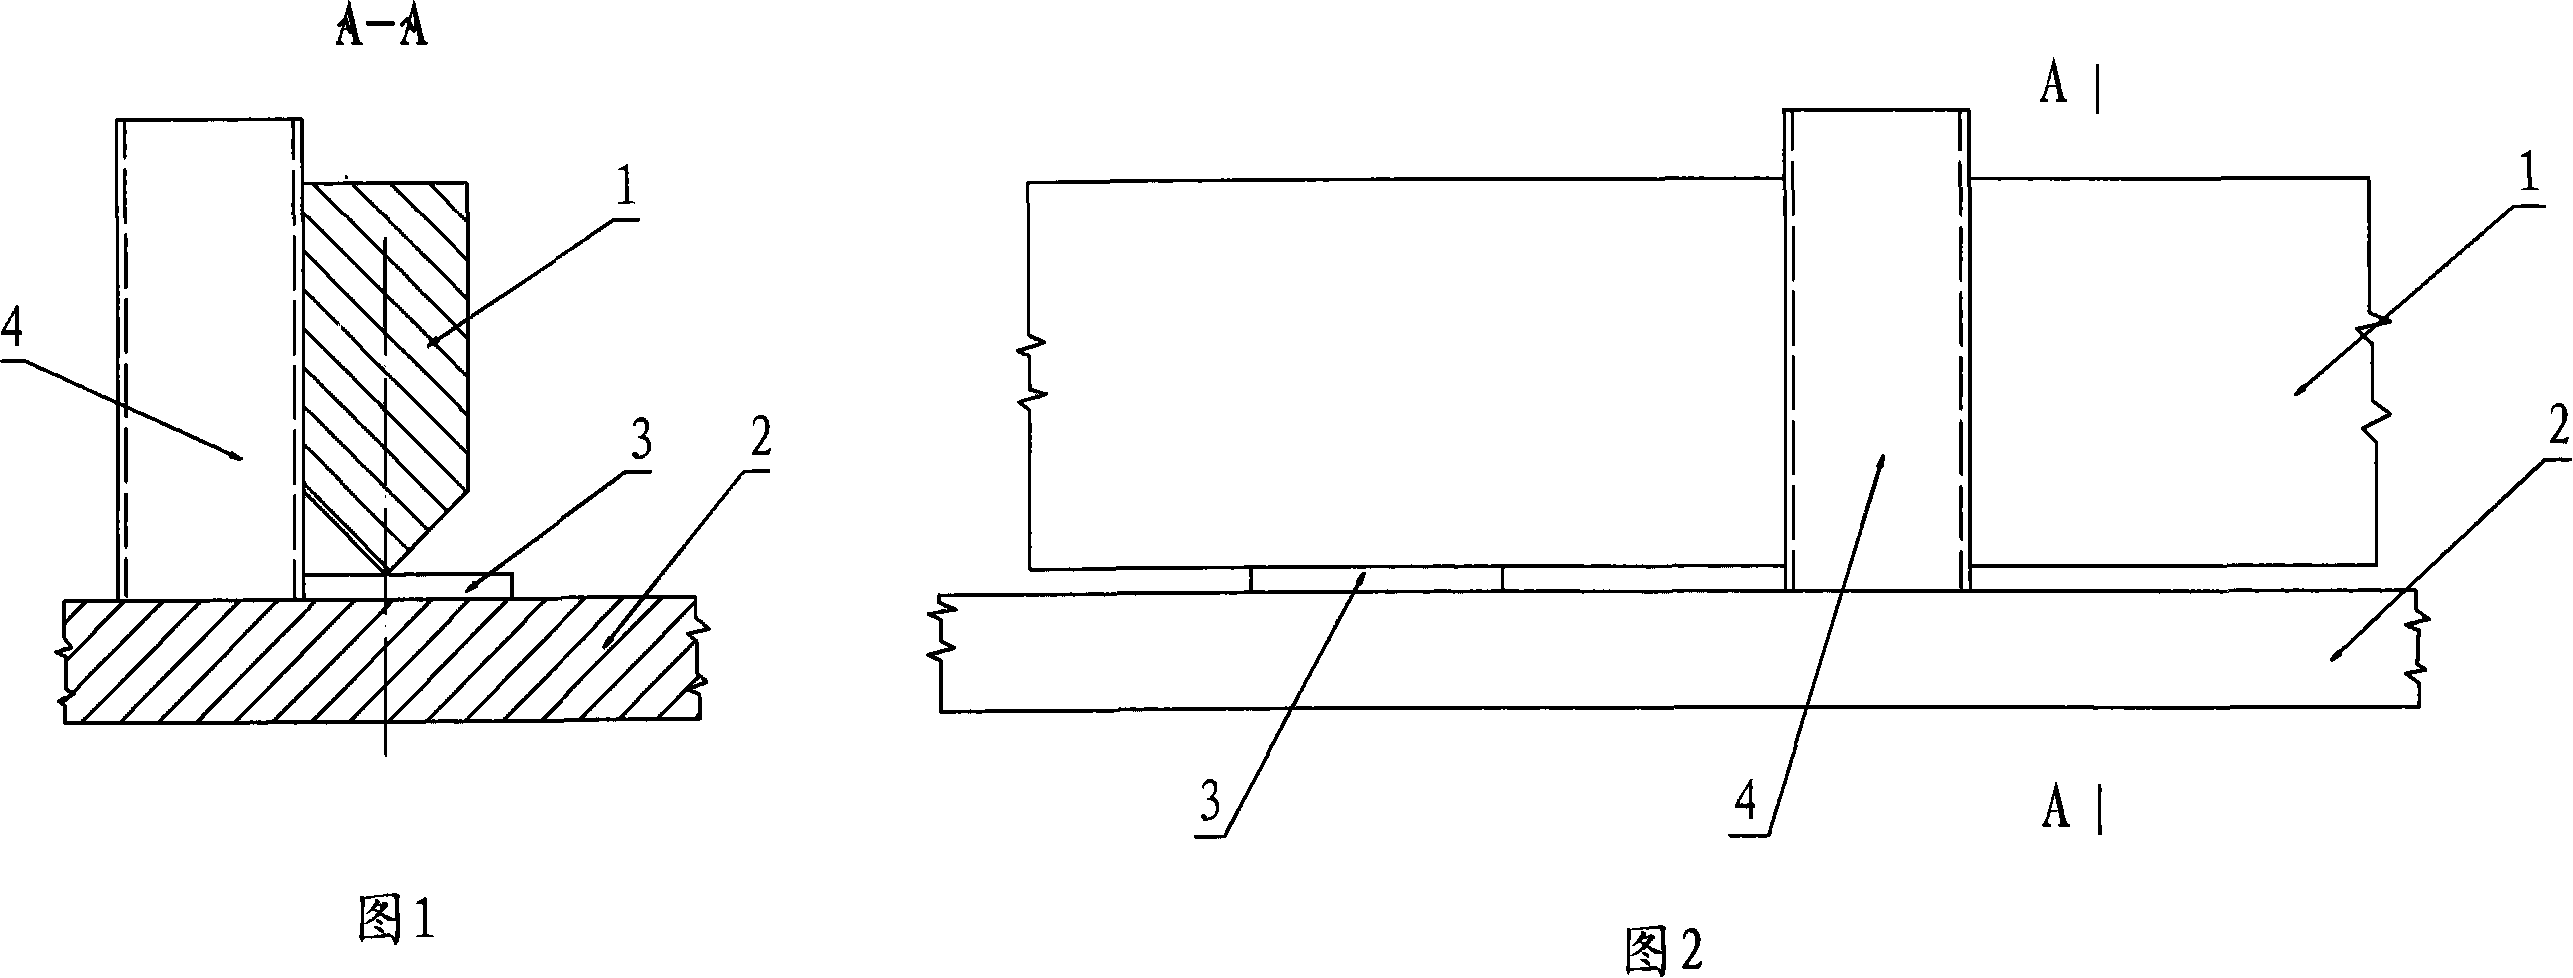 Large-sized T shaped joint full penetration assembled welding process